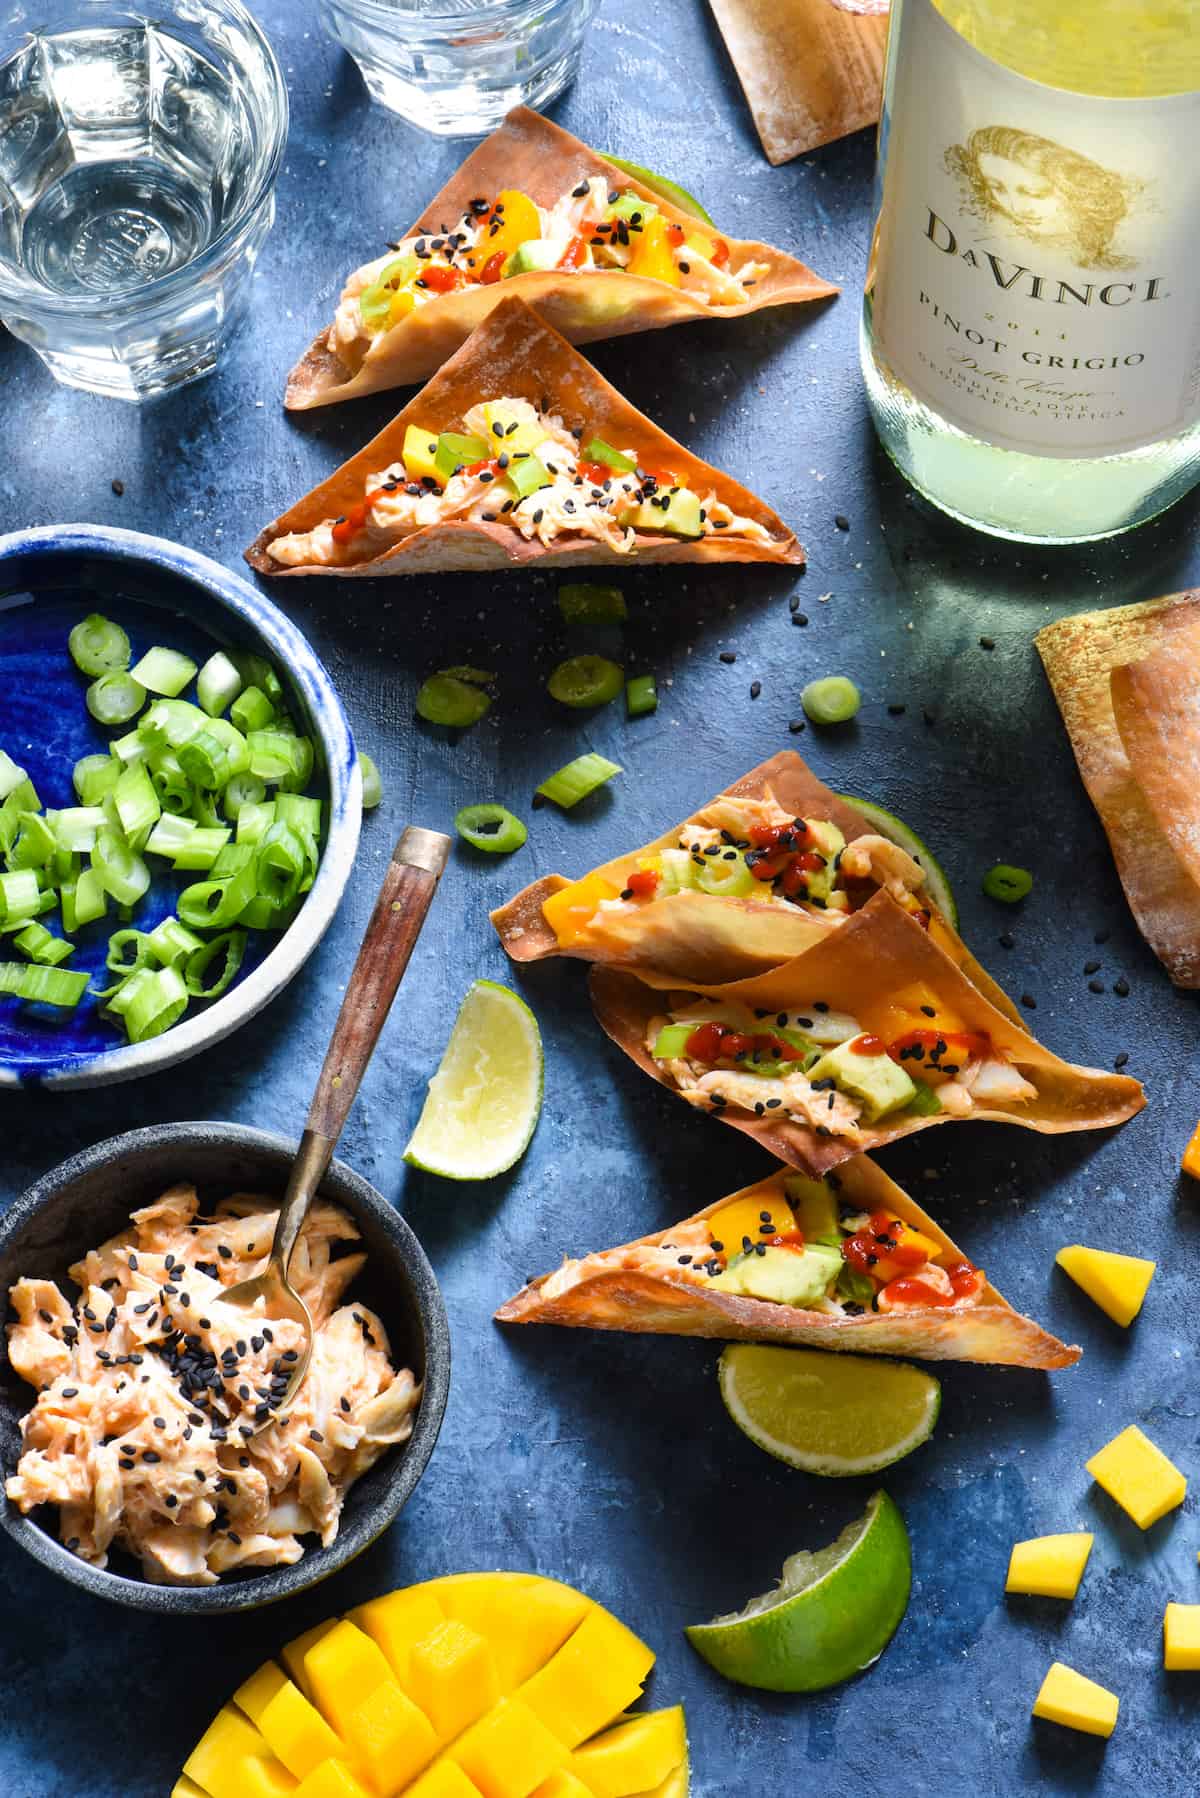 Spicy Crab Wonton Tacos - The flavors of a California sushi roll, in a crunchy wonton taco. Impress your guests with these easy entertaining recipe. | foxeslovelemons.com